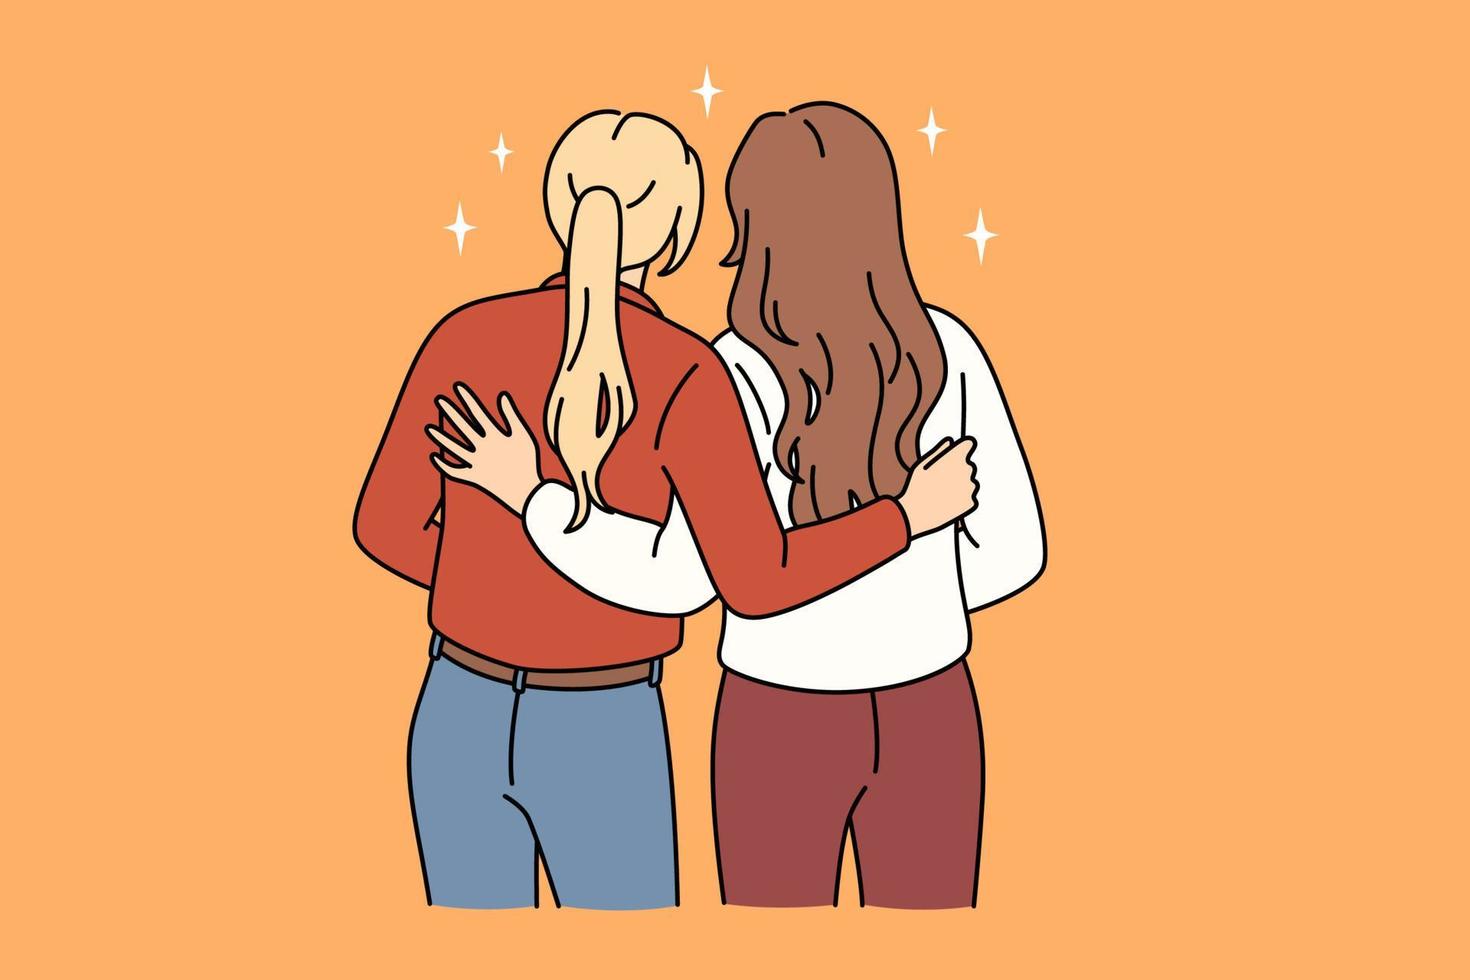 Lesbian love and homosexual couple concept. Two girls standing and embracing each other feeling loving couple vector illustration